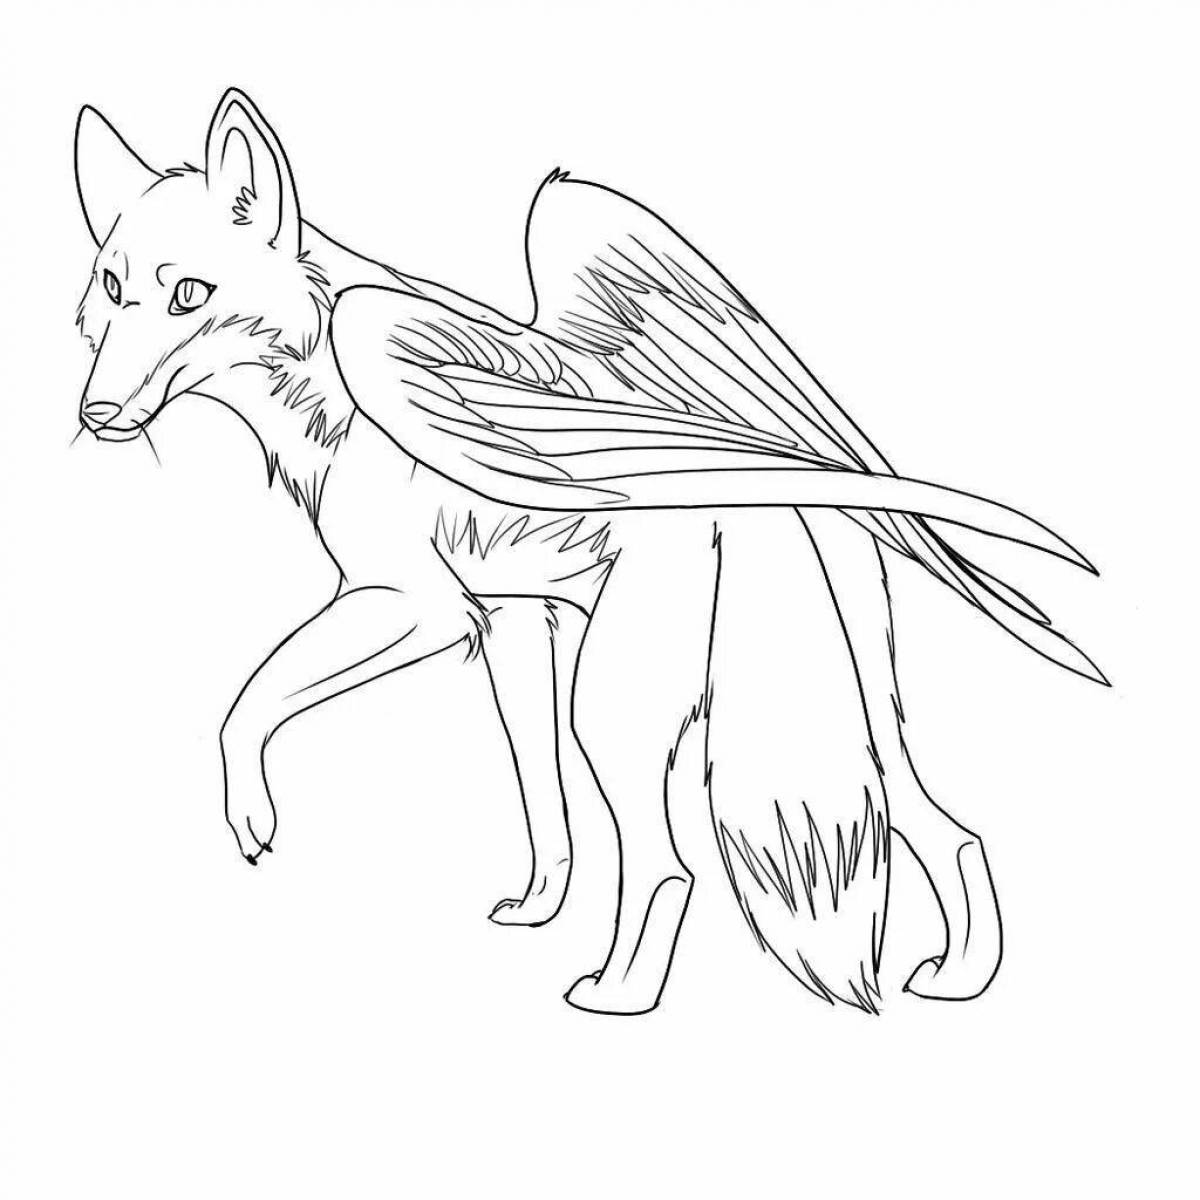 Fun coloring dog with wings